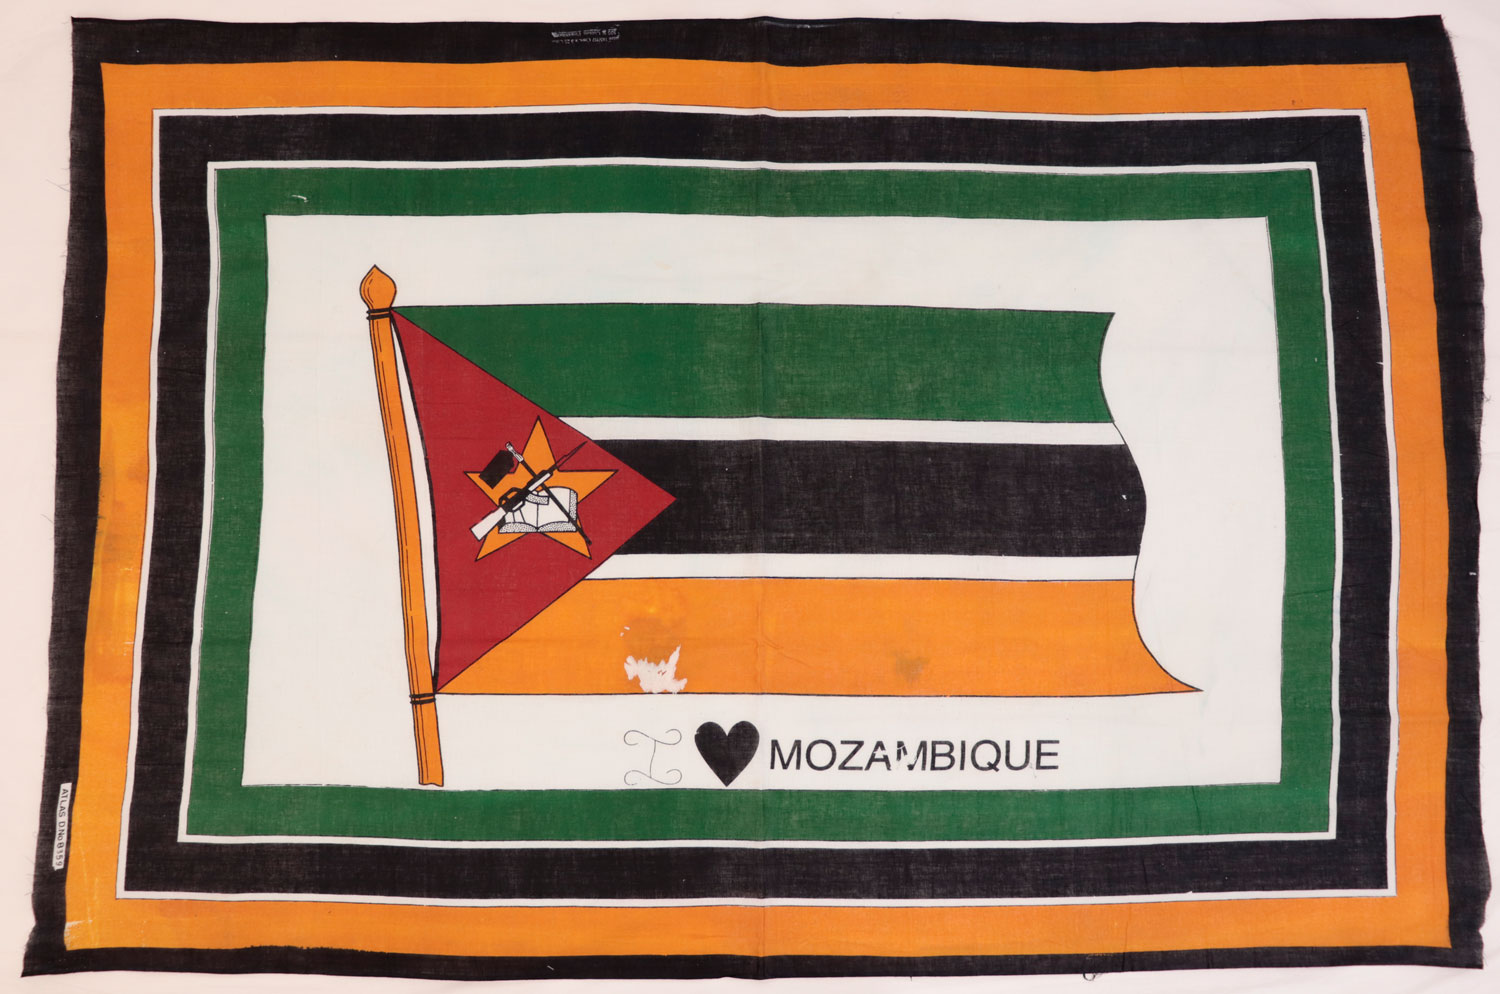 Capulana featuring the national flag of Mozambique with a border around the edge of green, black and orange with the legend 'I 'heart' Mozambique' below': Africa, Southern Africa, Mozambique, 1994-2000.